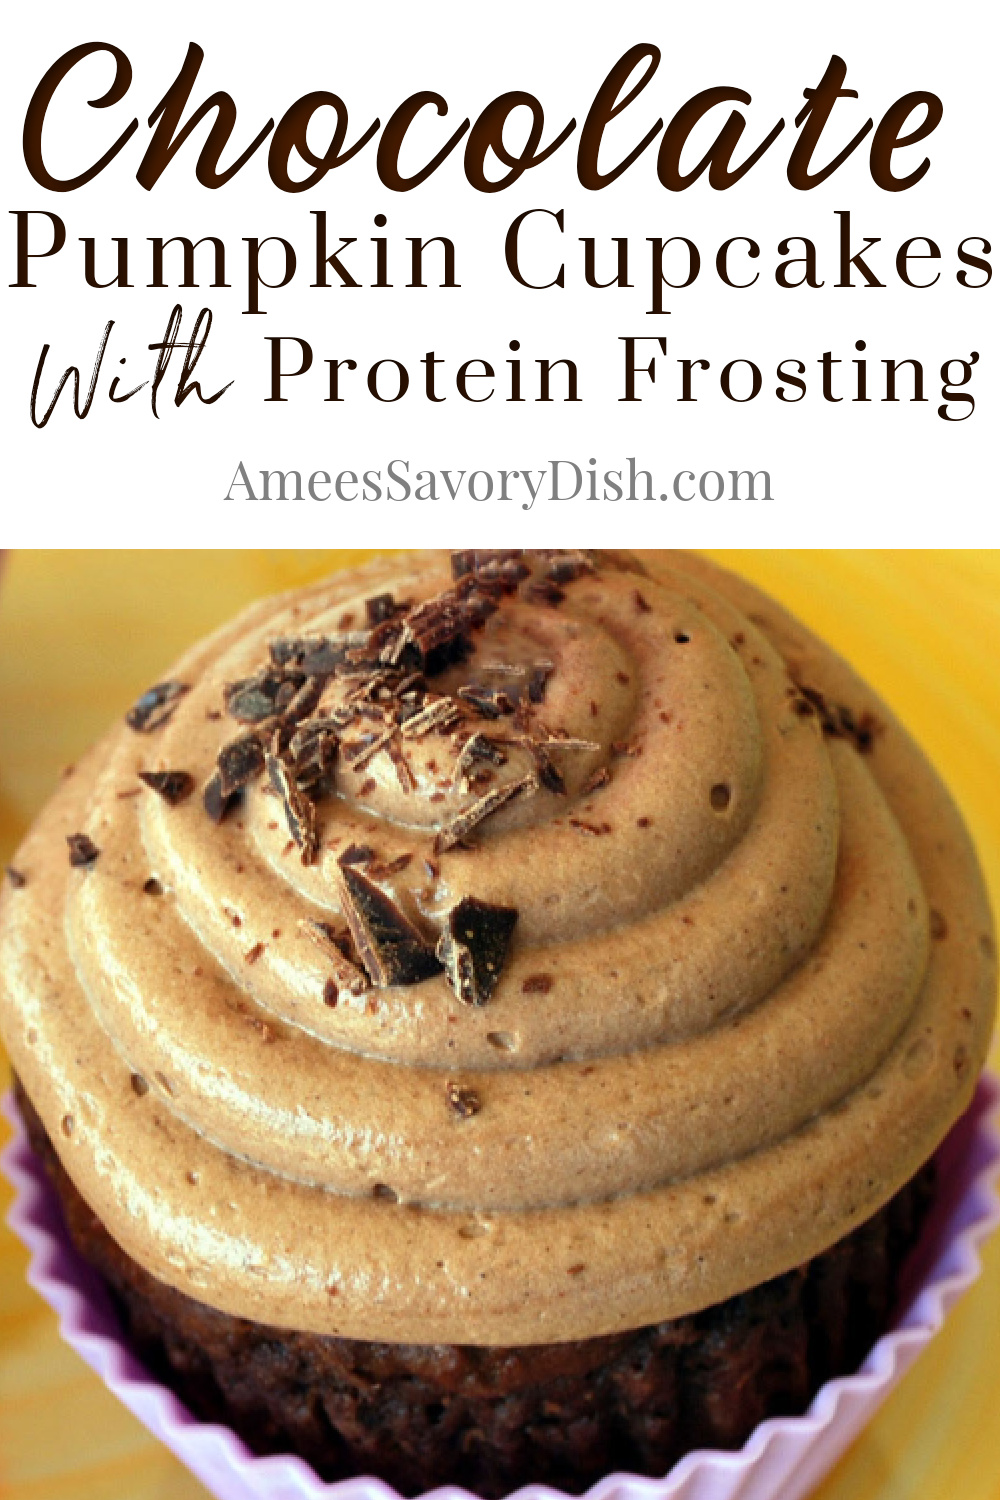 These pumpkin chocolate cupcakes with protein frosting are very quick to prepare and a delicious healthier dessert option. #pumpkinrecipes #healthiercupcakes #cupcakes #proteinfrosting via @Ameessavorydish